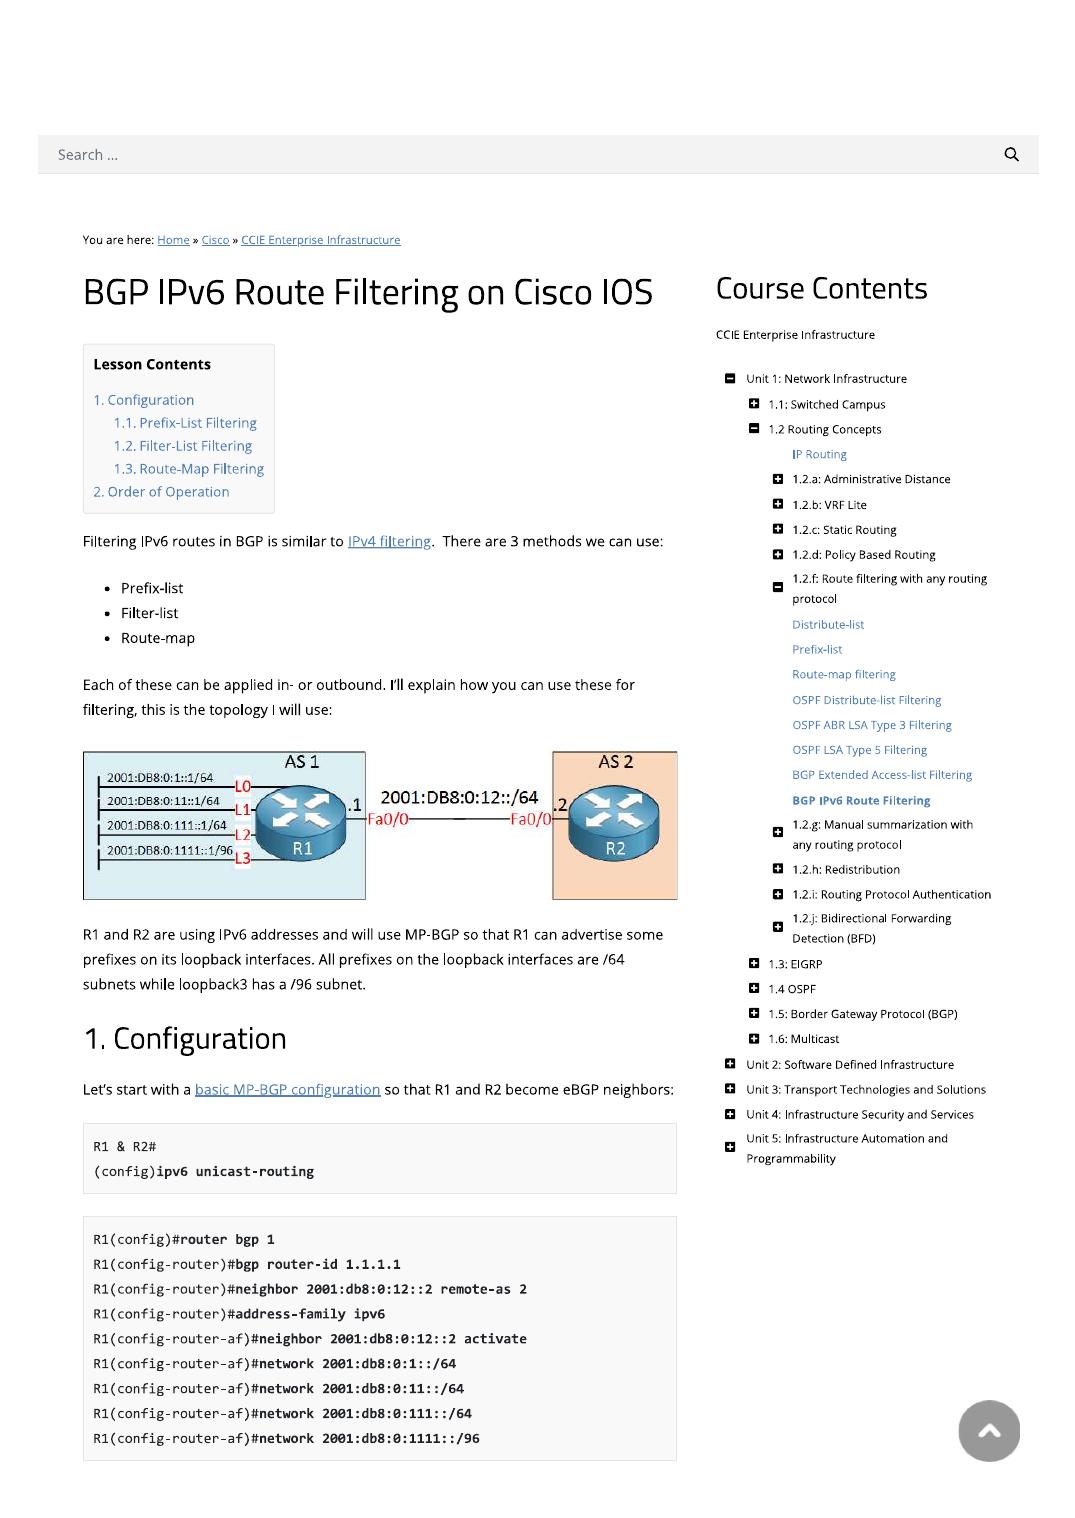 BGP IPv6 Route Filtering on Cisco IOS by Rohan